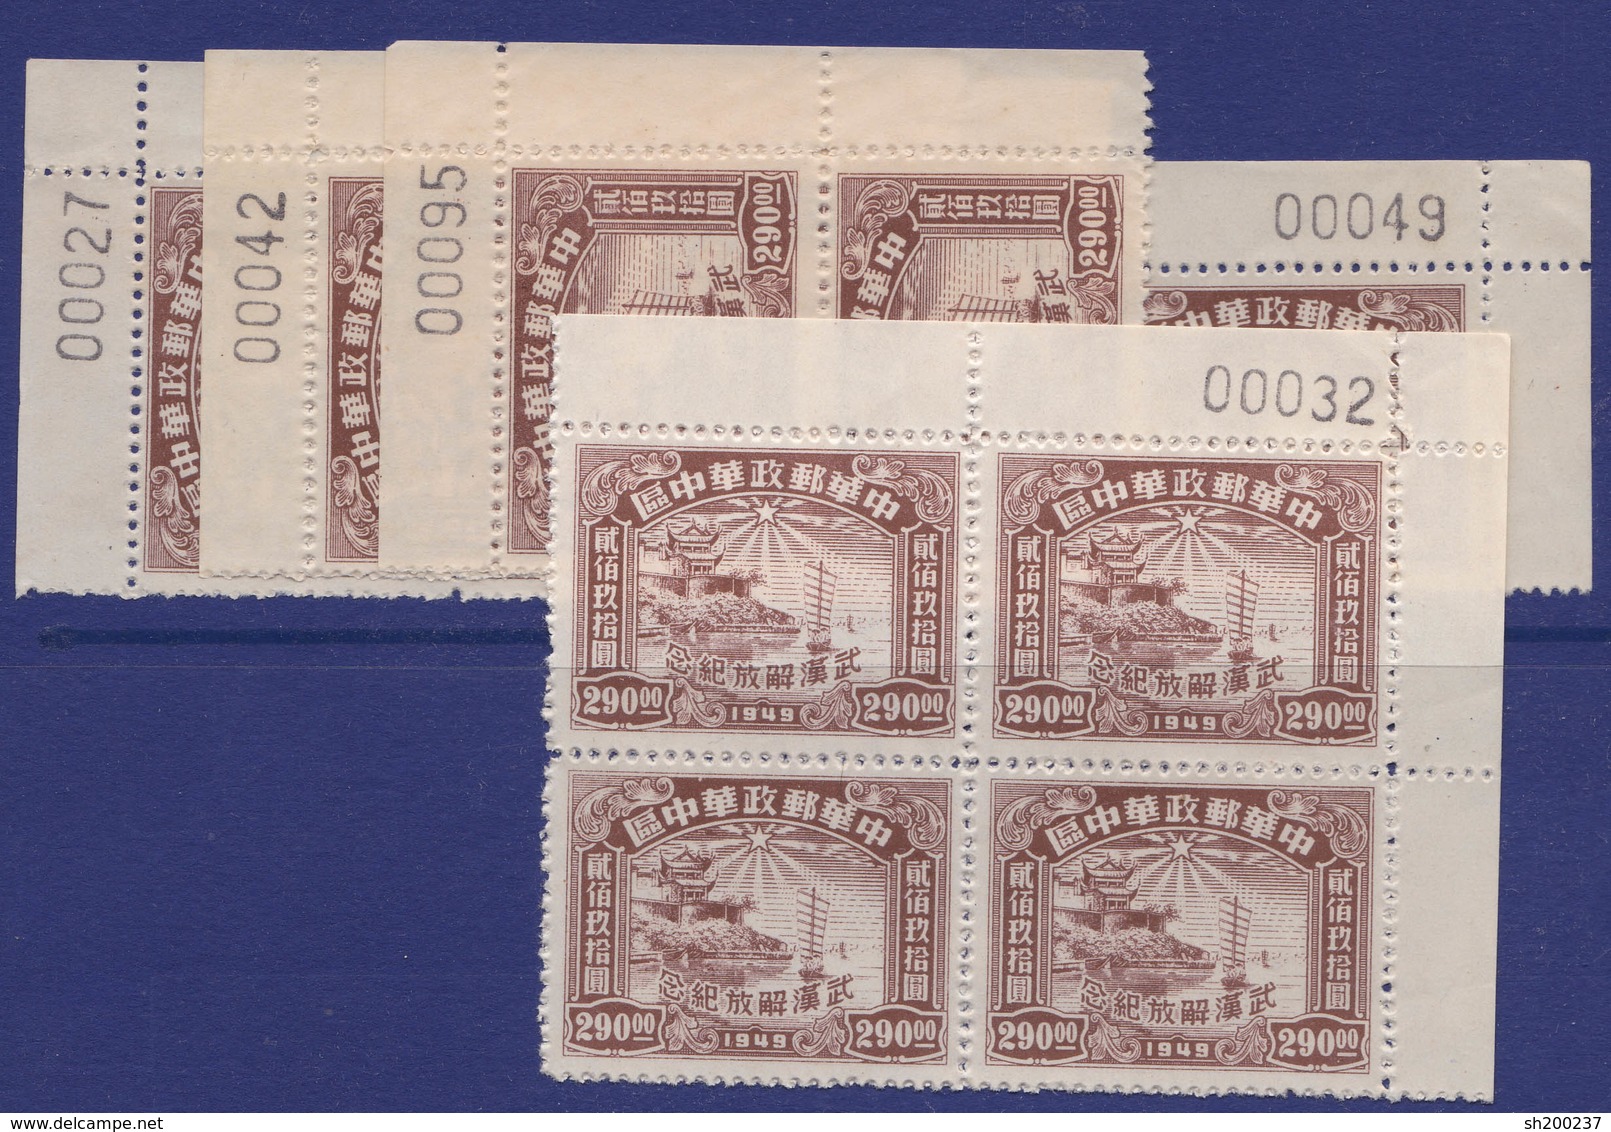 1949 Lib. Of Hankow LCC88 Corner Number - Centraal-China 1948-49